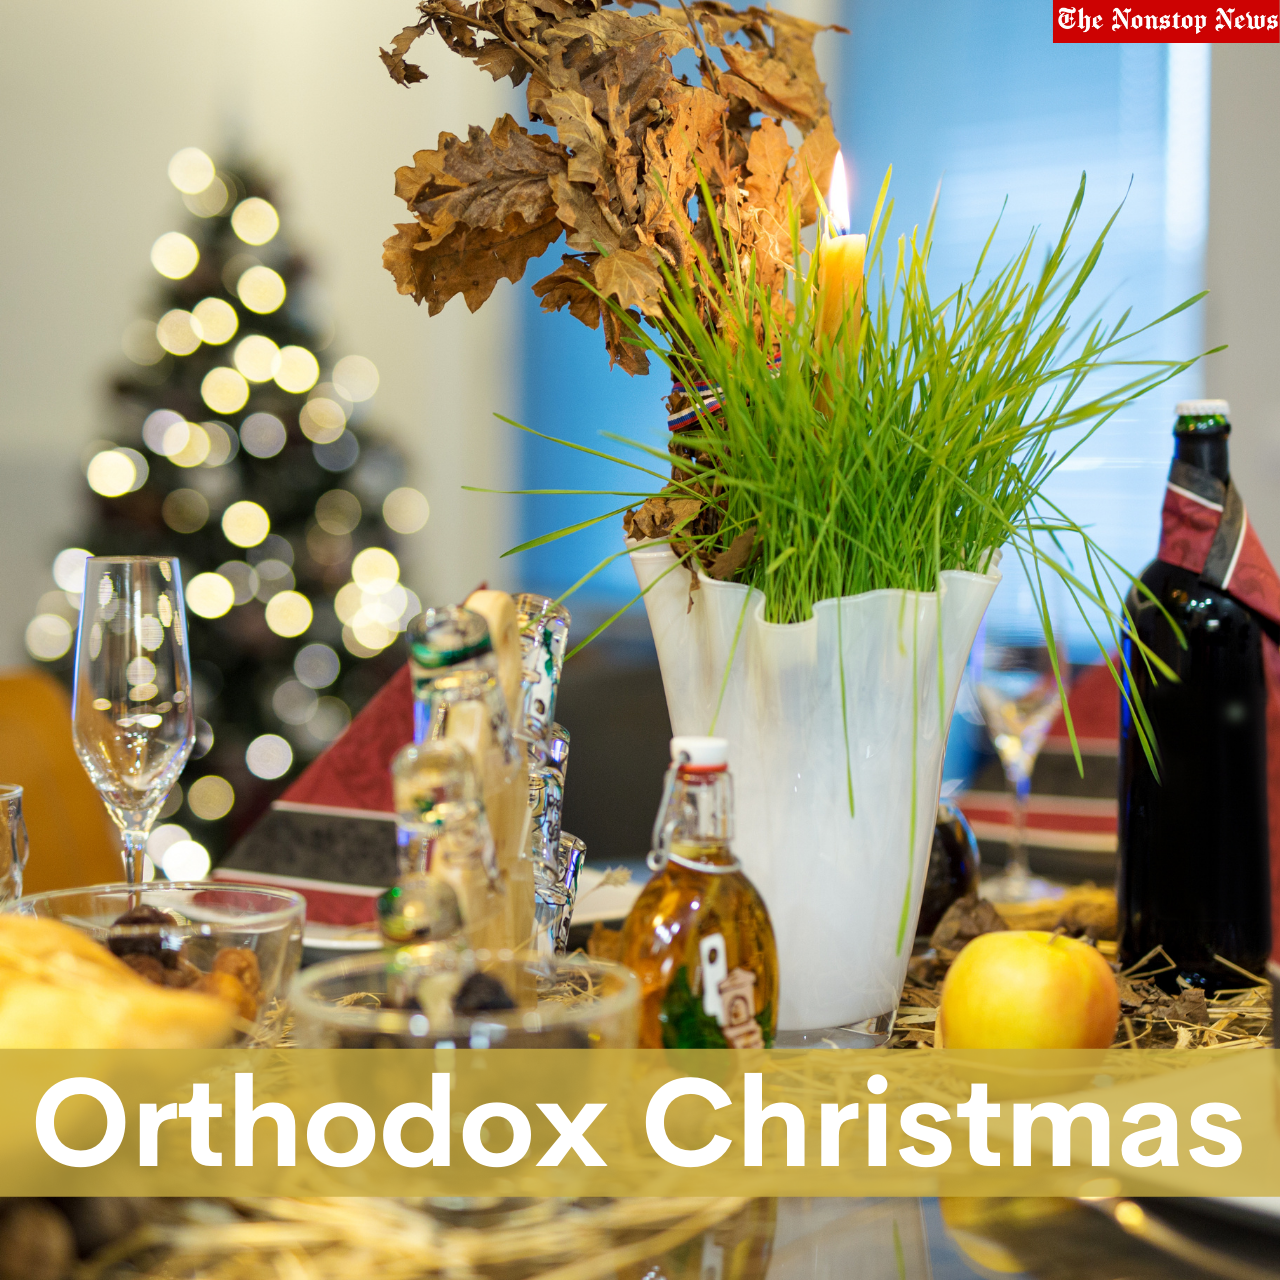 Orthodox Christmas 2022 Wishes, Quotes, Greetings, Sayings, HD Images, Messages to share